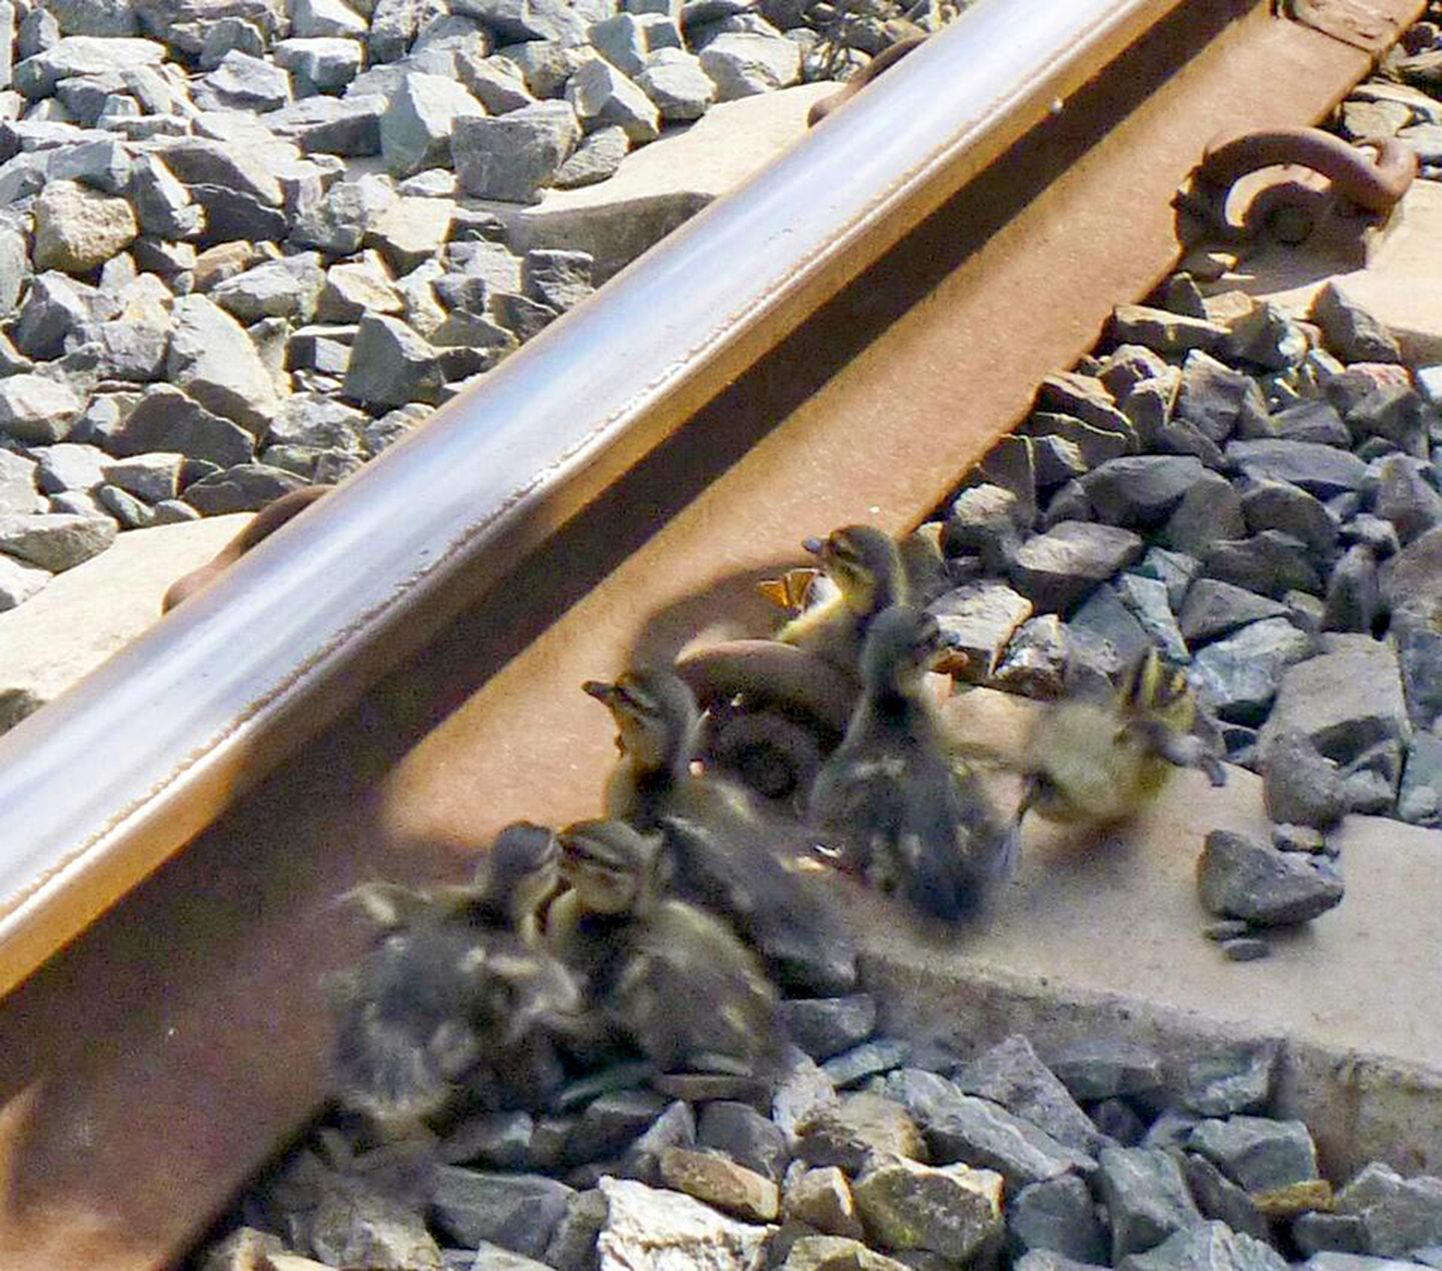 PIC FROM Caters News - (PICTURED: The six ducklings on the train tracks) - This duckling has a good reason to look happy after being rescued from the path of an oncoming train just in the nick of time. The adorable family of ducklings were saved from certain death by two kind-hearted engineers who came to their rescue after finding them stranded on a train track in New Zealand.  James Fox and Ryan Milligan from engineering company Tonkin and Taylor came across the vulnerable birds while working on the Main East Line near Pongakawa in the Bay of Plenty.  The Geotechnics specialists were returning to base in a road-rail protector vehicle when the driver saw six ducklings stuck between the rails trying to get back to their mum. SEE CATERS COPY.